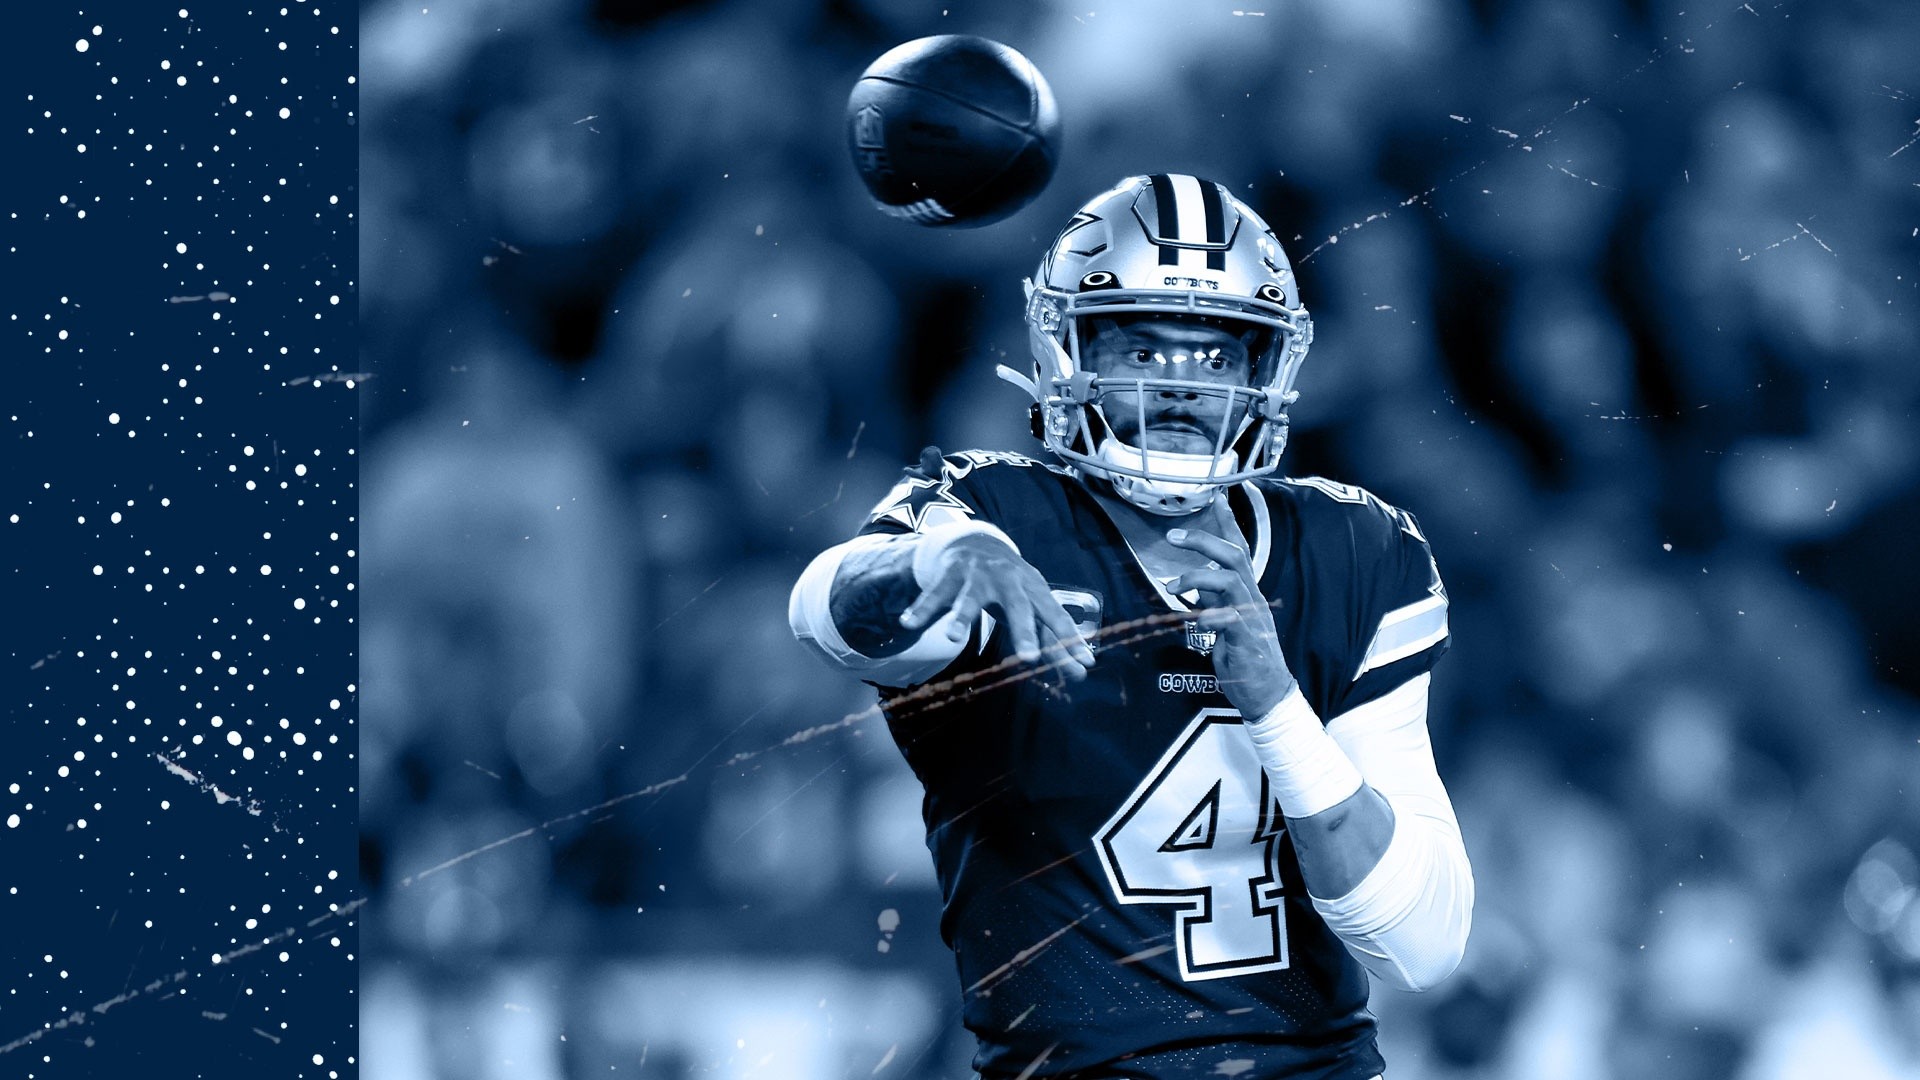 Can the Dallas Cowboys Offense Scheme Its Way Into Super Bowl Contention